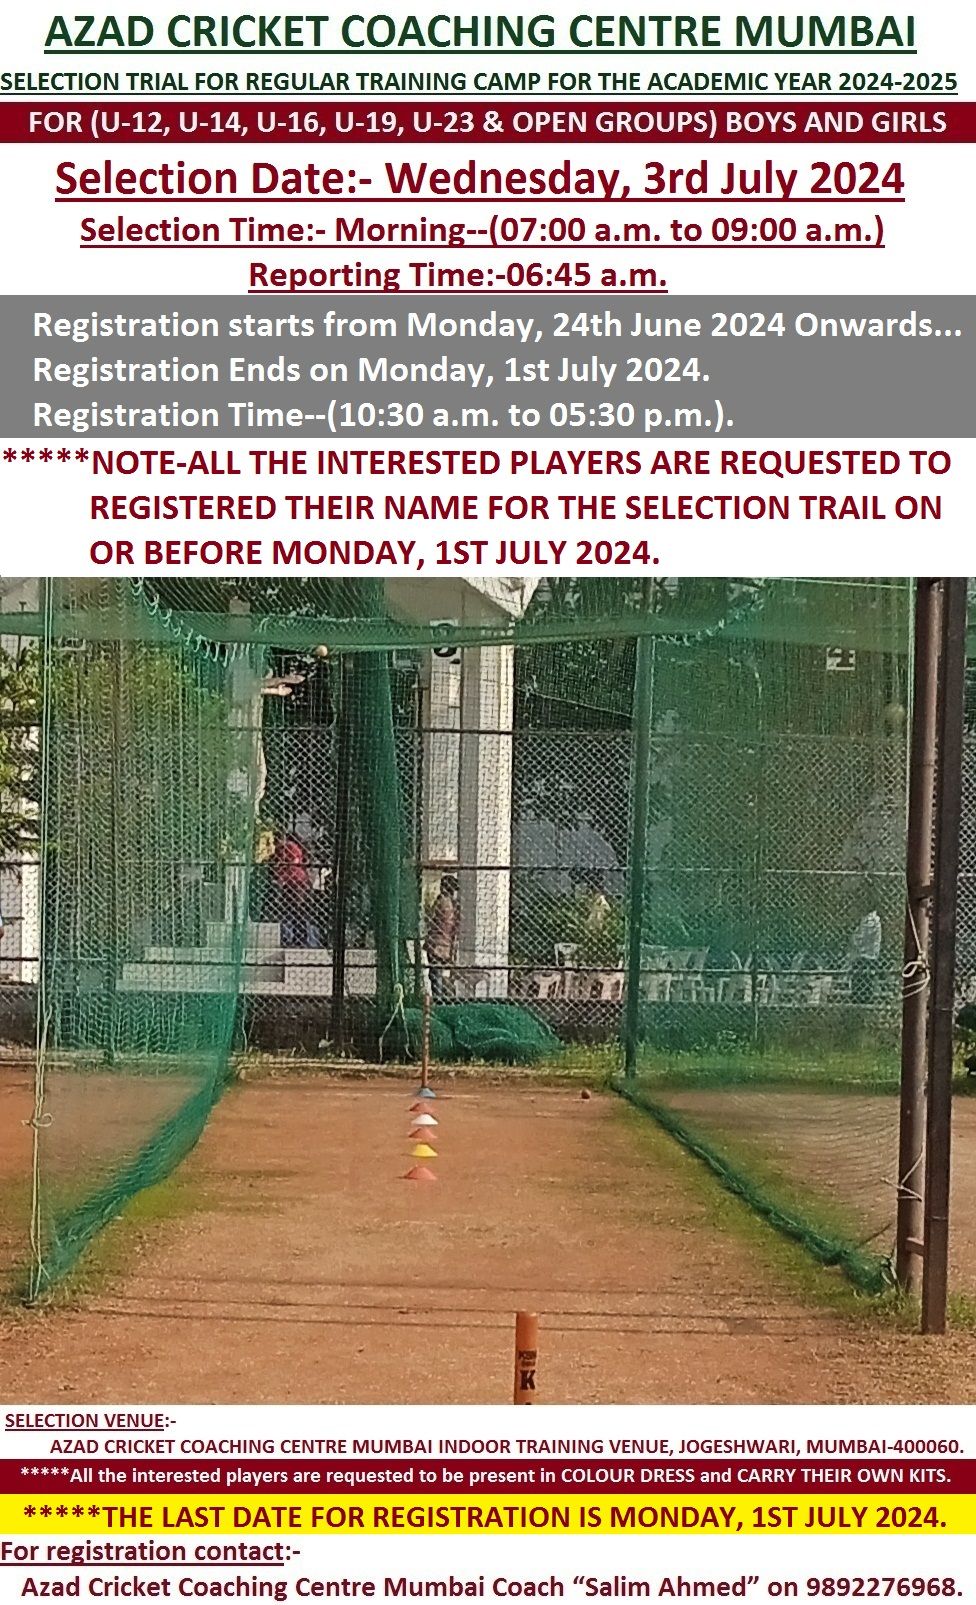 ACCC MUMBAI SELECTION TRIAL FOR REGULAR TRAINING CAMP FOR THE ACADEMIC YEAR 2024-2025